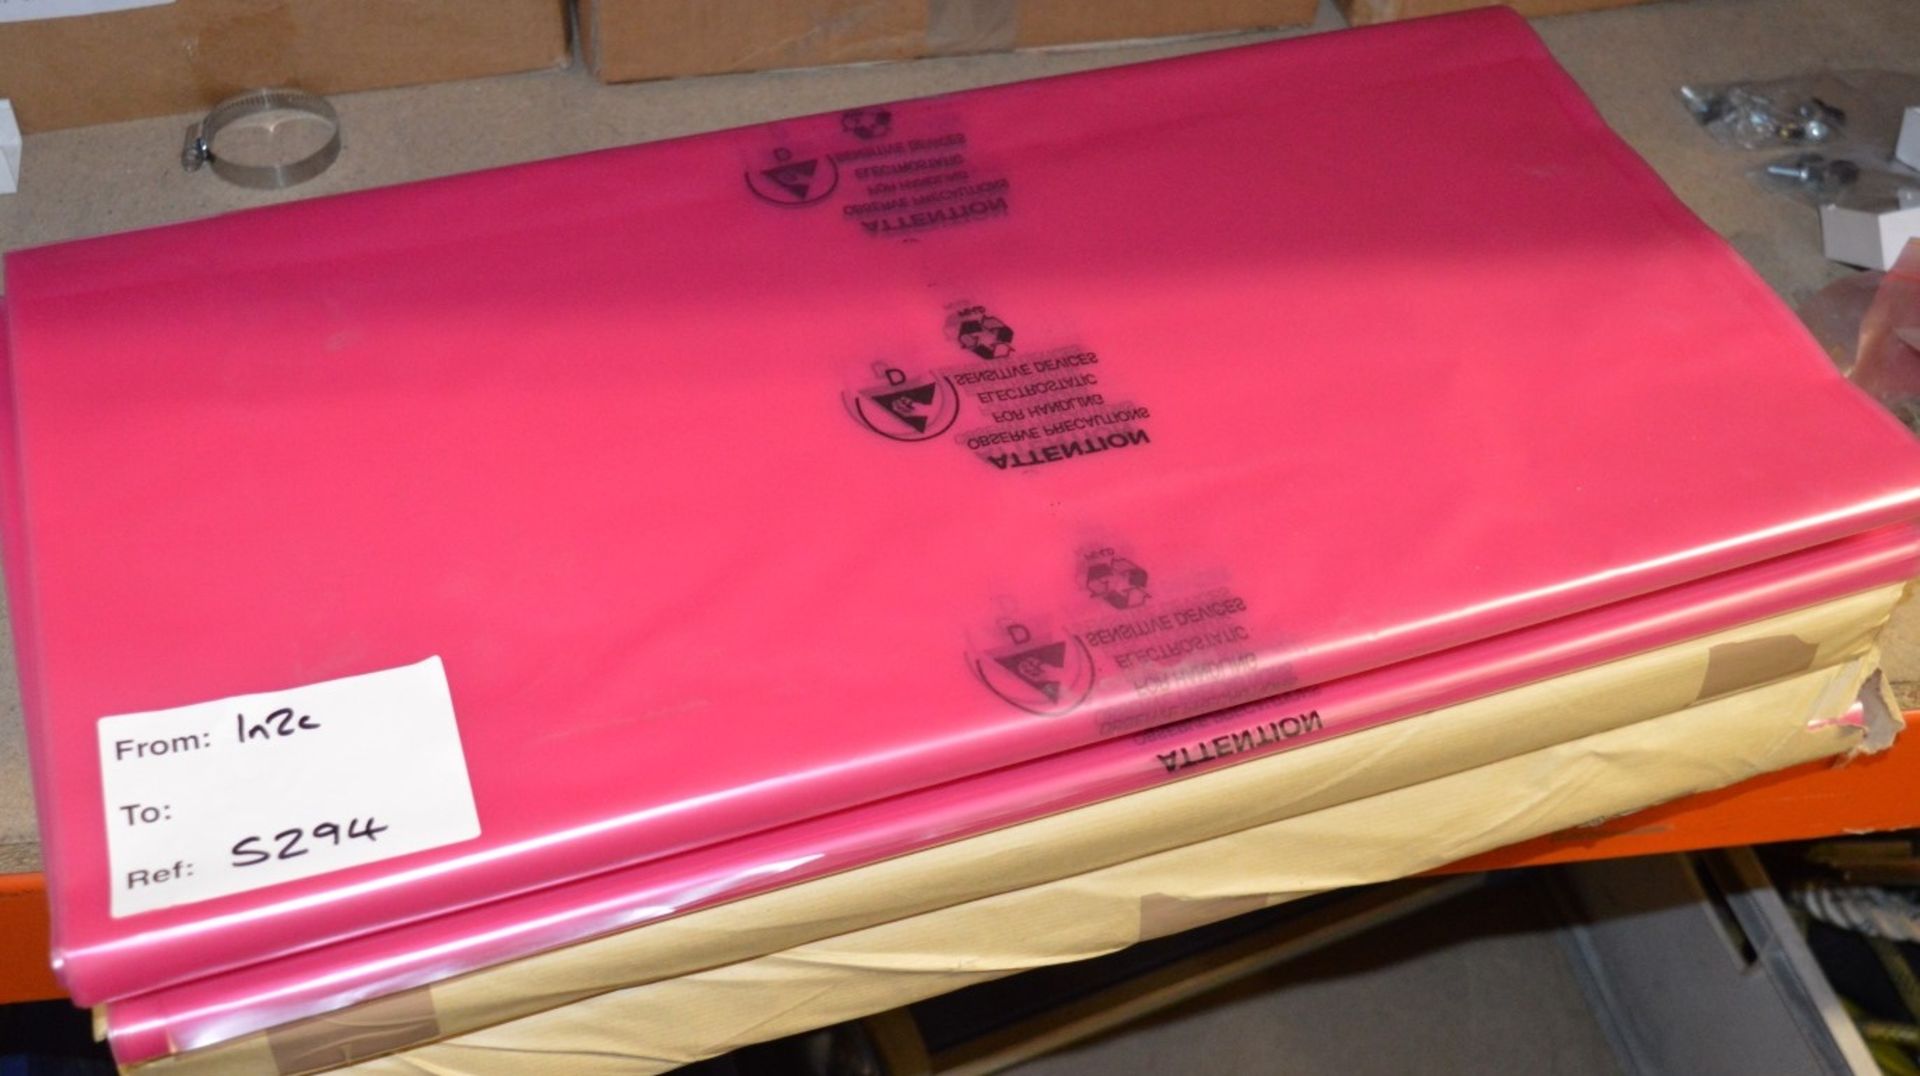 400 x Pink Antistatic ESD Logo Bags - Size 18 x 24 Inch - 300g - Full Box of 400 - Brand New Stock -